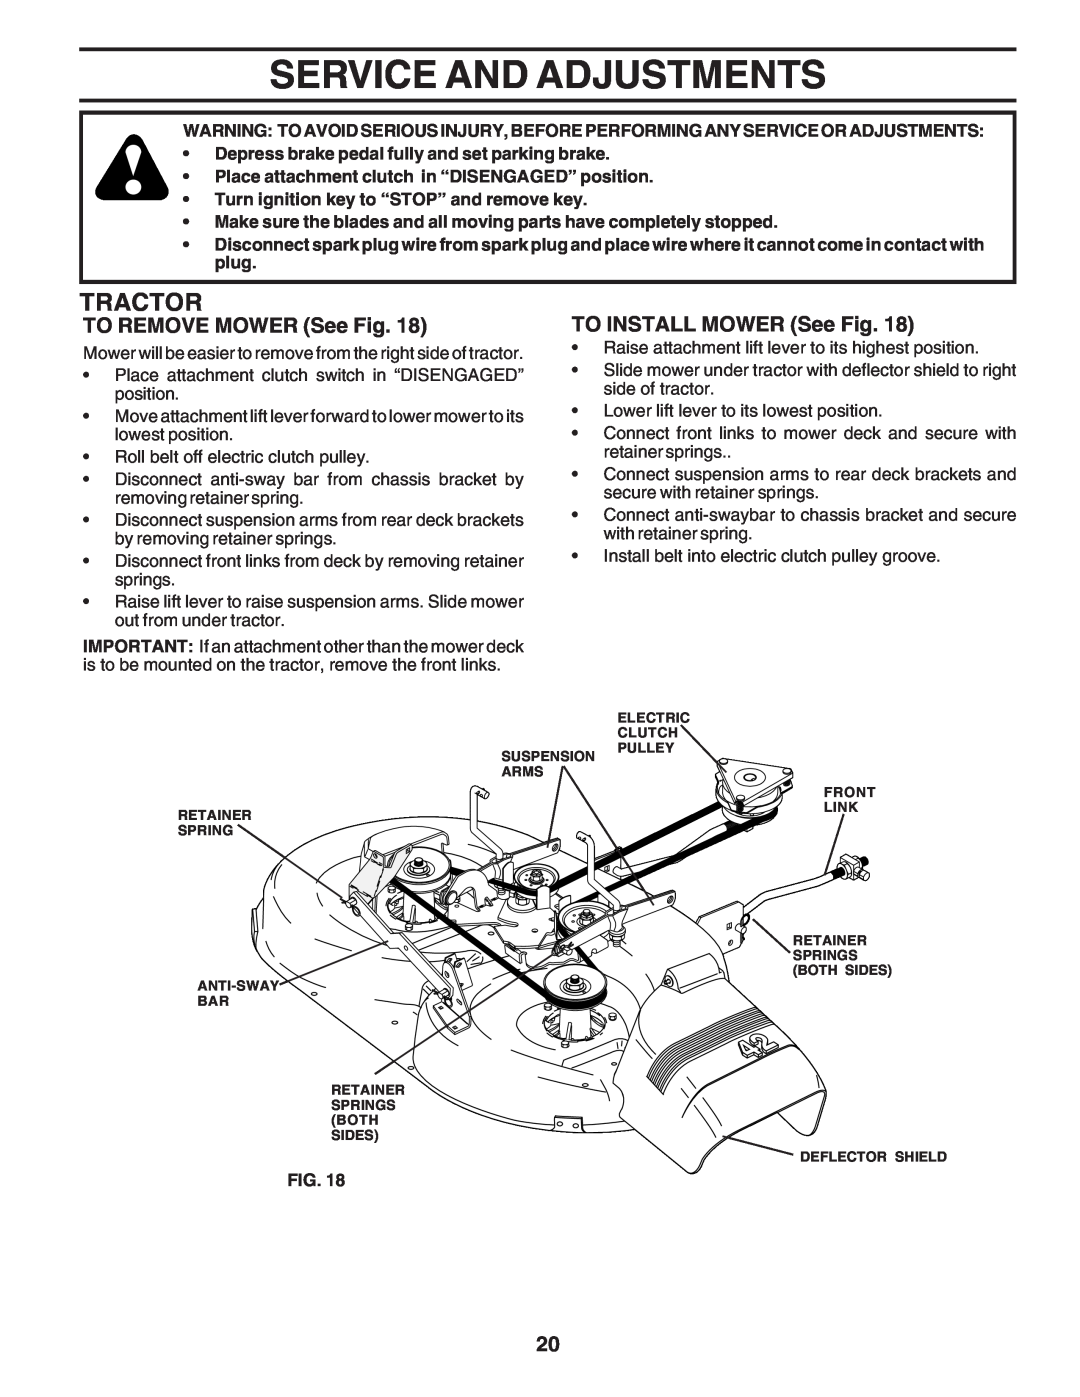 Poulan 183284 owner manual Service And Adjustments, TO REMOVE MOWER See Fig, TO INSTALL MOWER See Fig, Tractor 